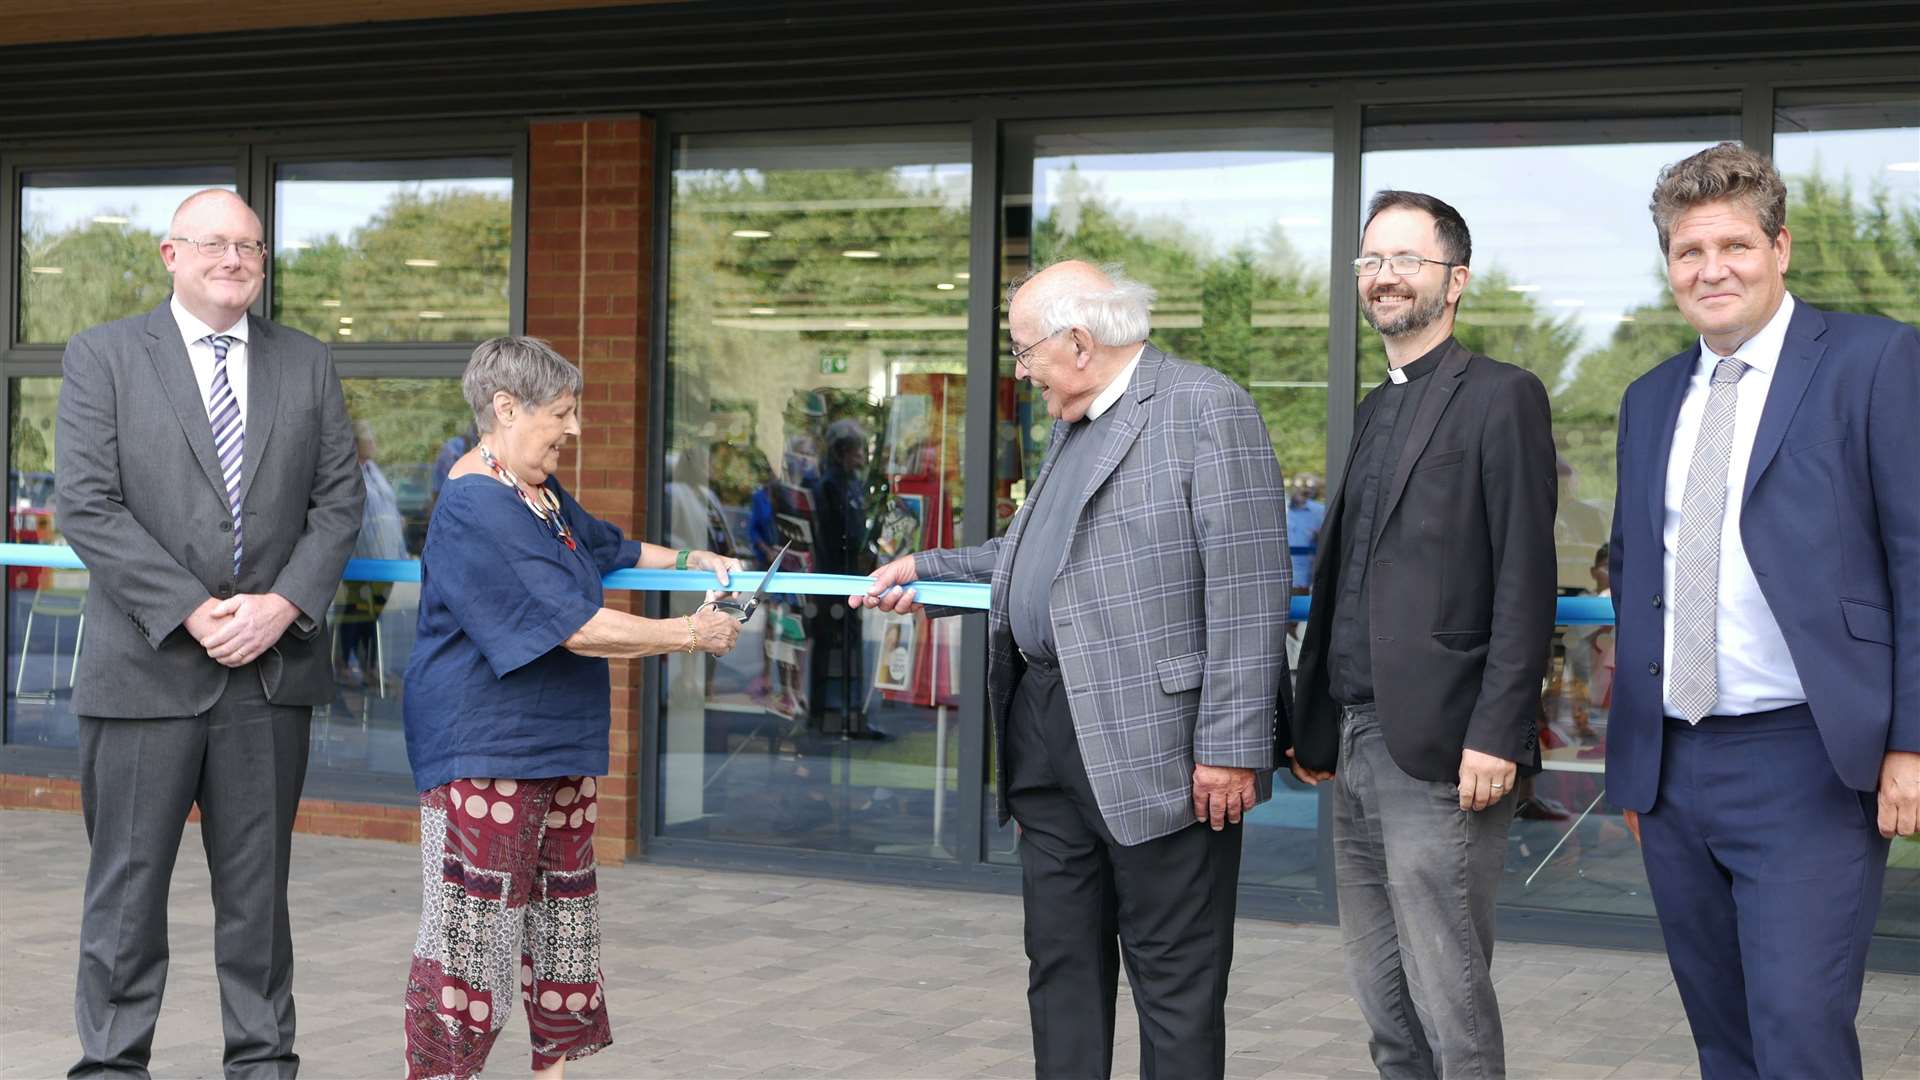 The building was opened by Reverend Joe King, the school's previous chairman of governors, and the building's namesake